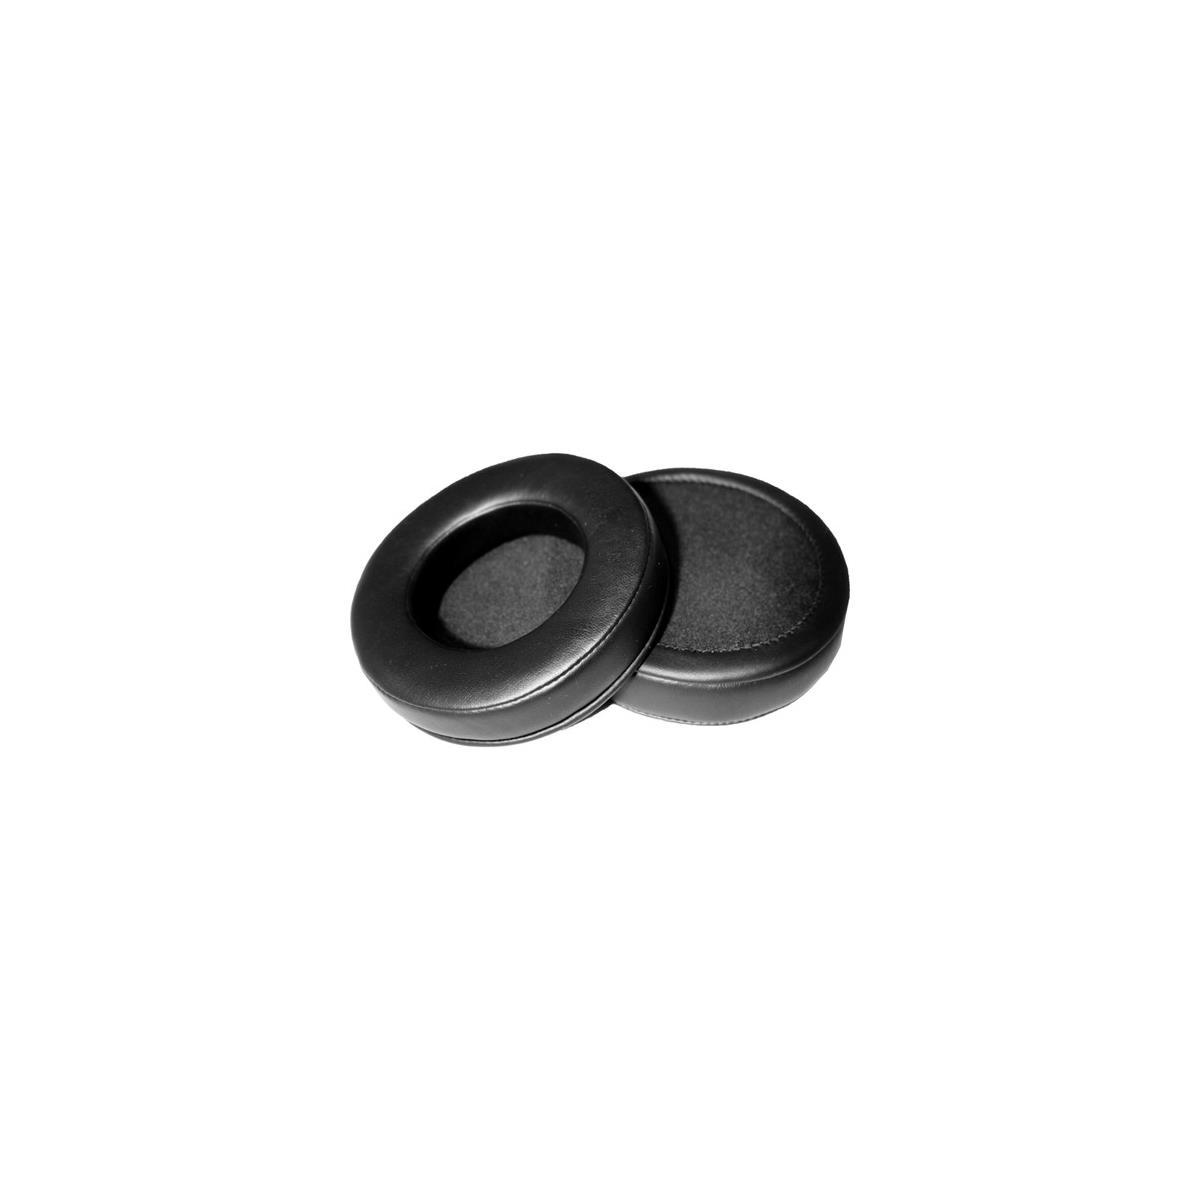 Image of Dekoni Audio Platinum Protein Leather Ear Pads for DT